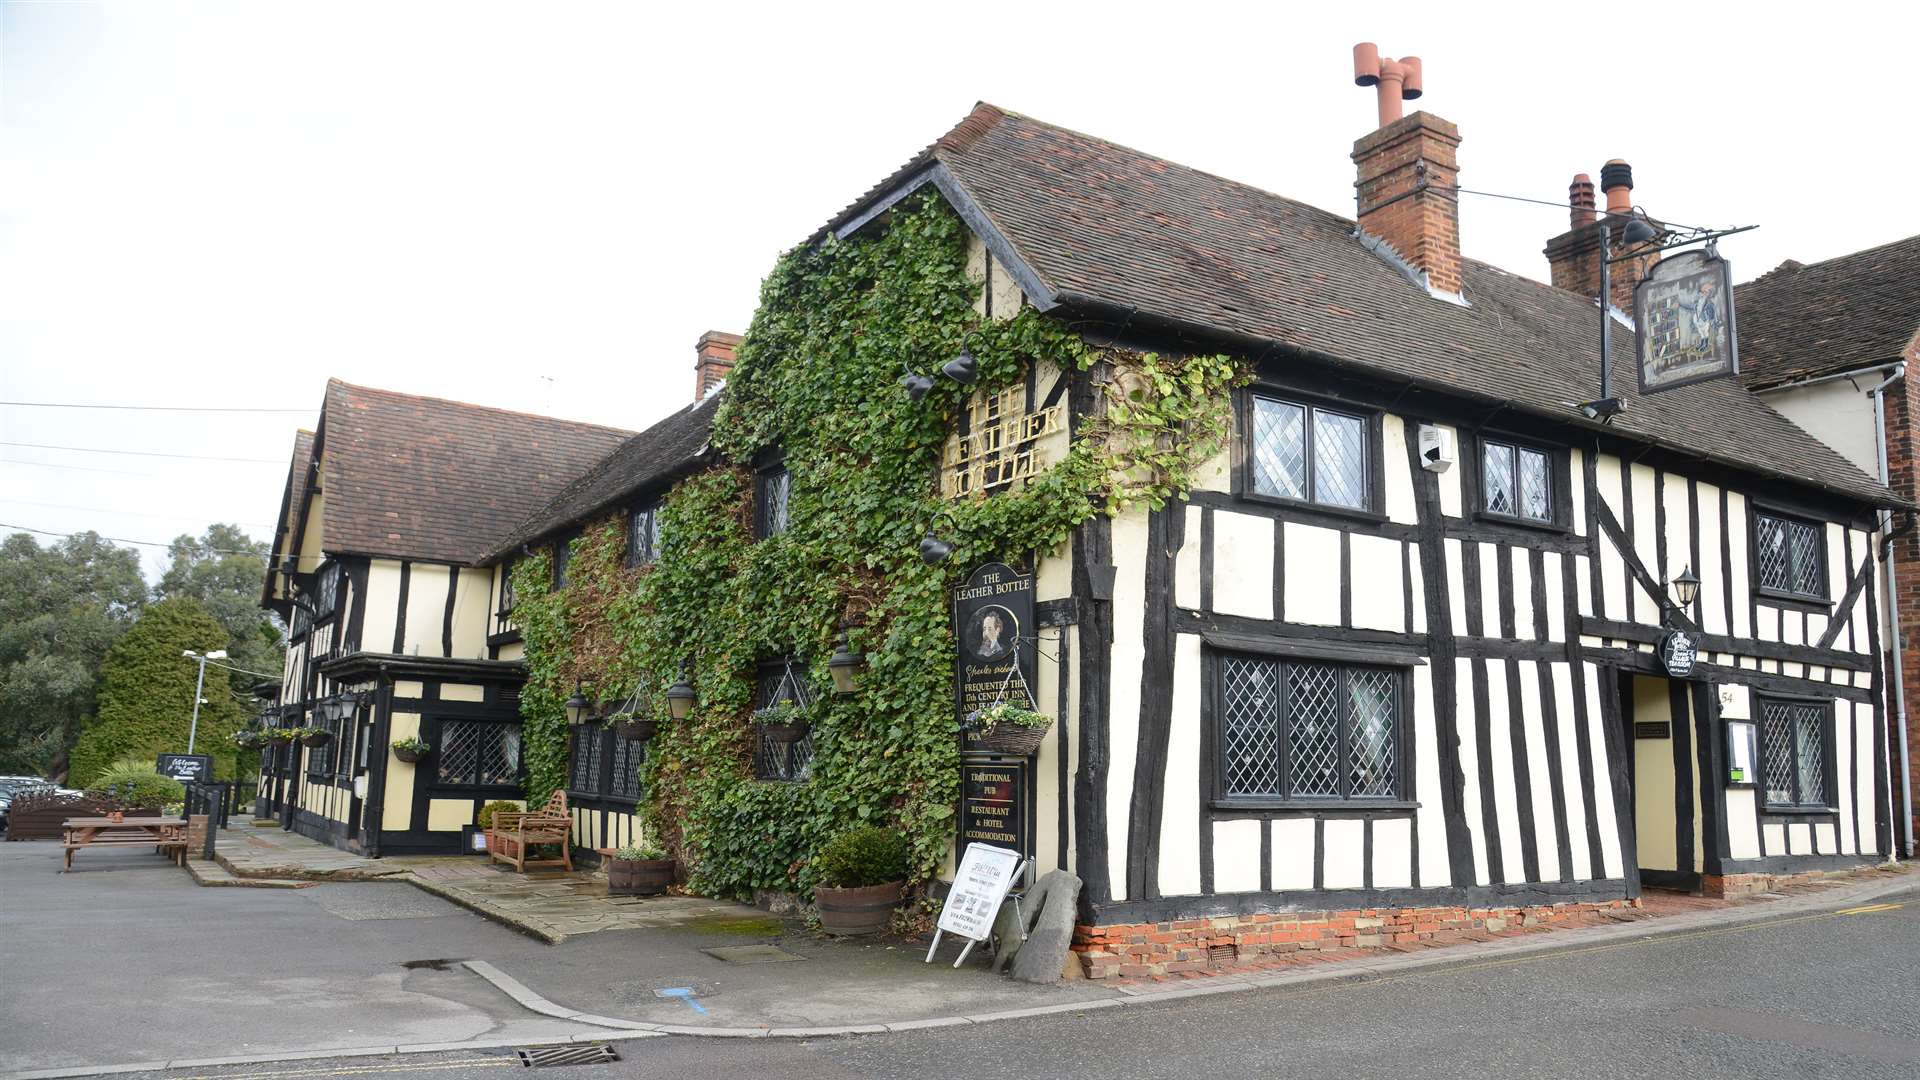 Staff at the Leather Bottle, Cobham, are devastated by the loss of Molly McClaren